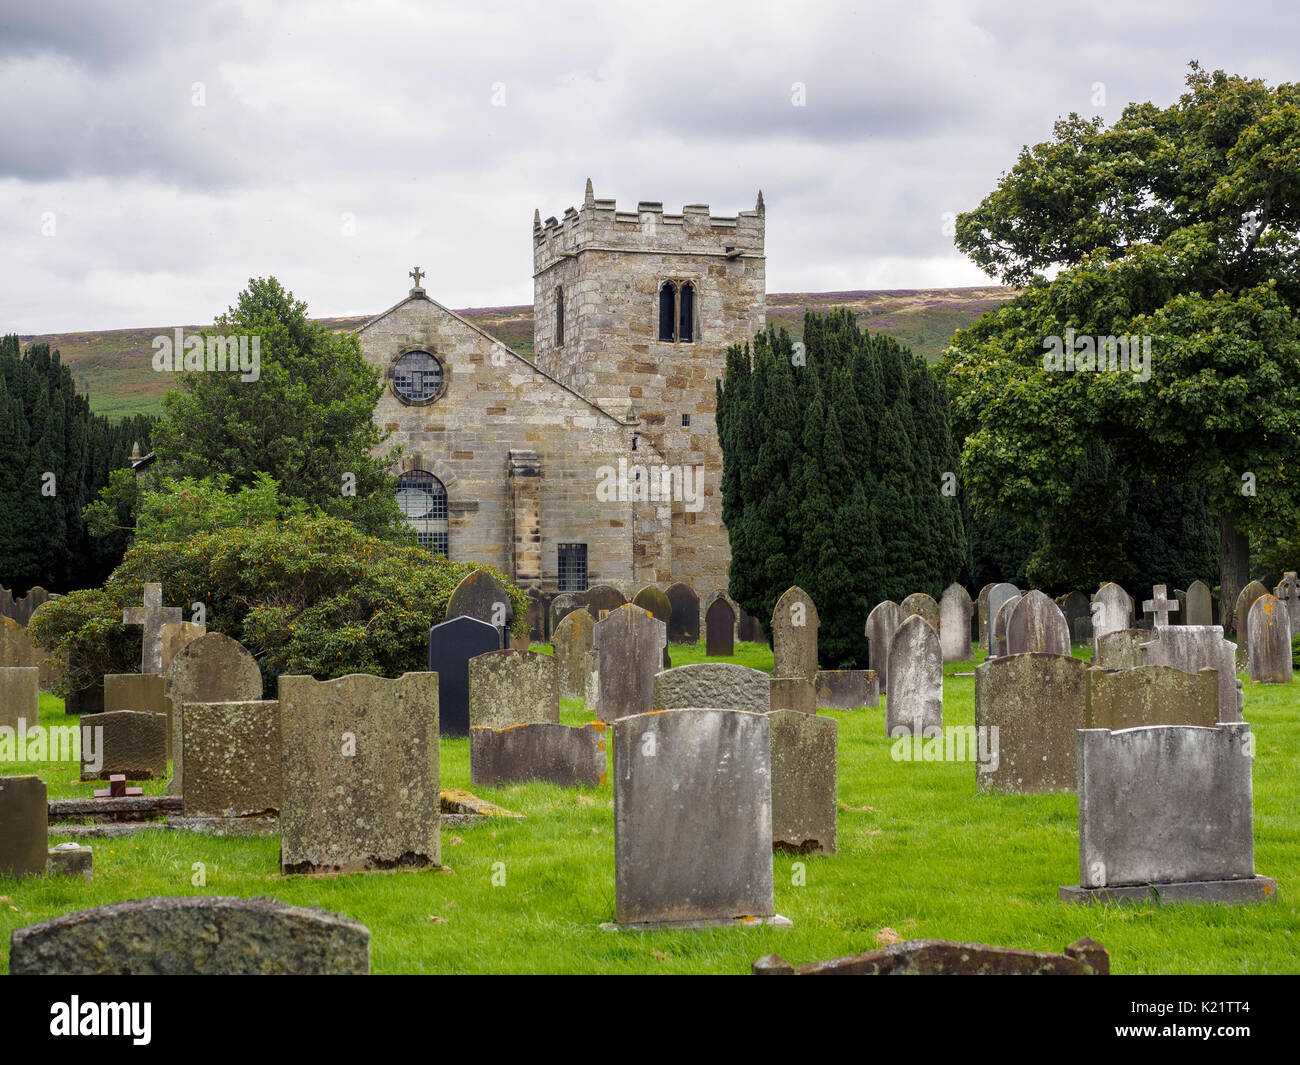 St Hilda's Church Danby, North Yorkshire, UK in Danby Dale built on an old pre-Christian burial ground Stock Photo